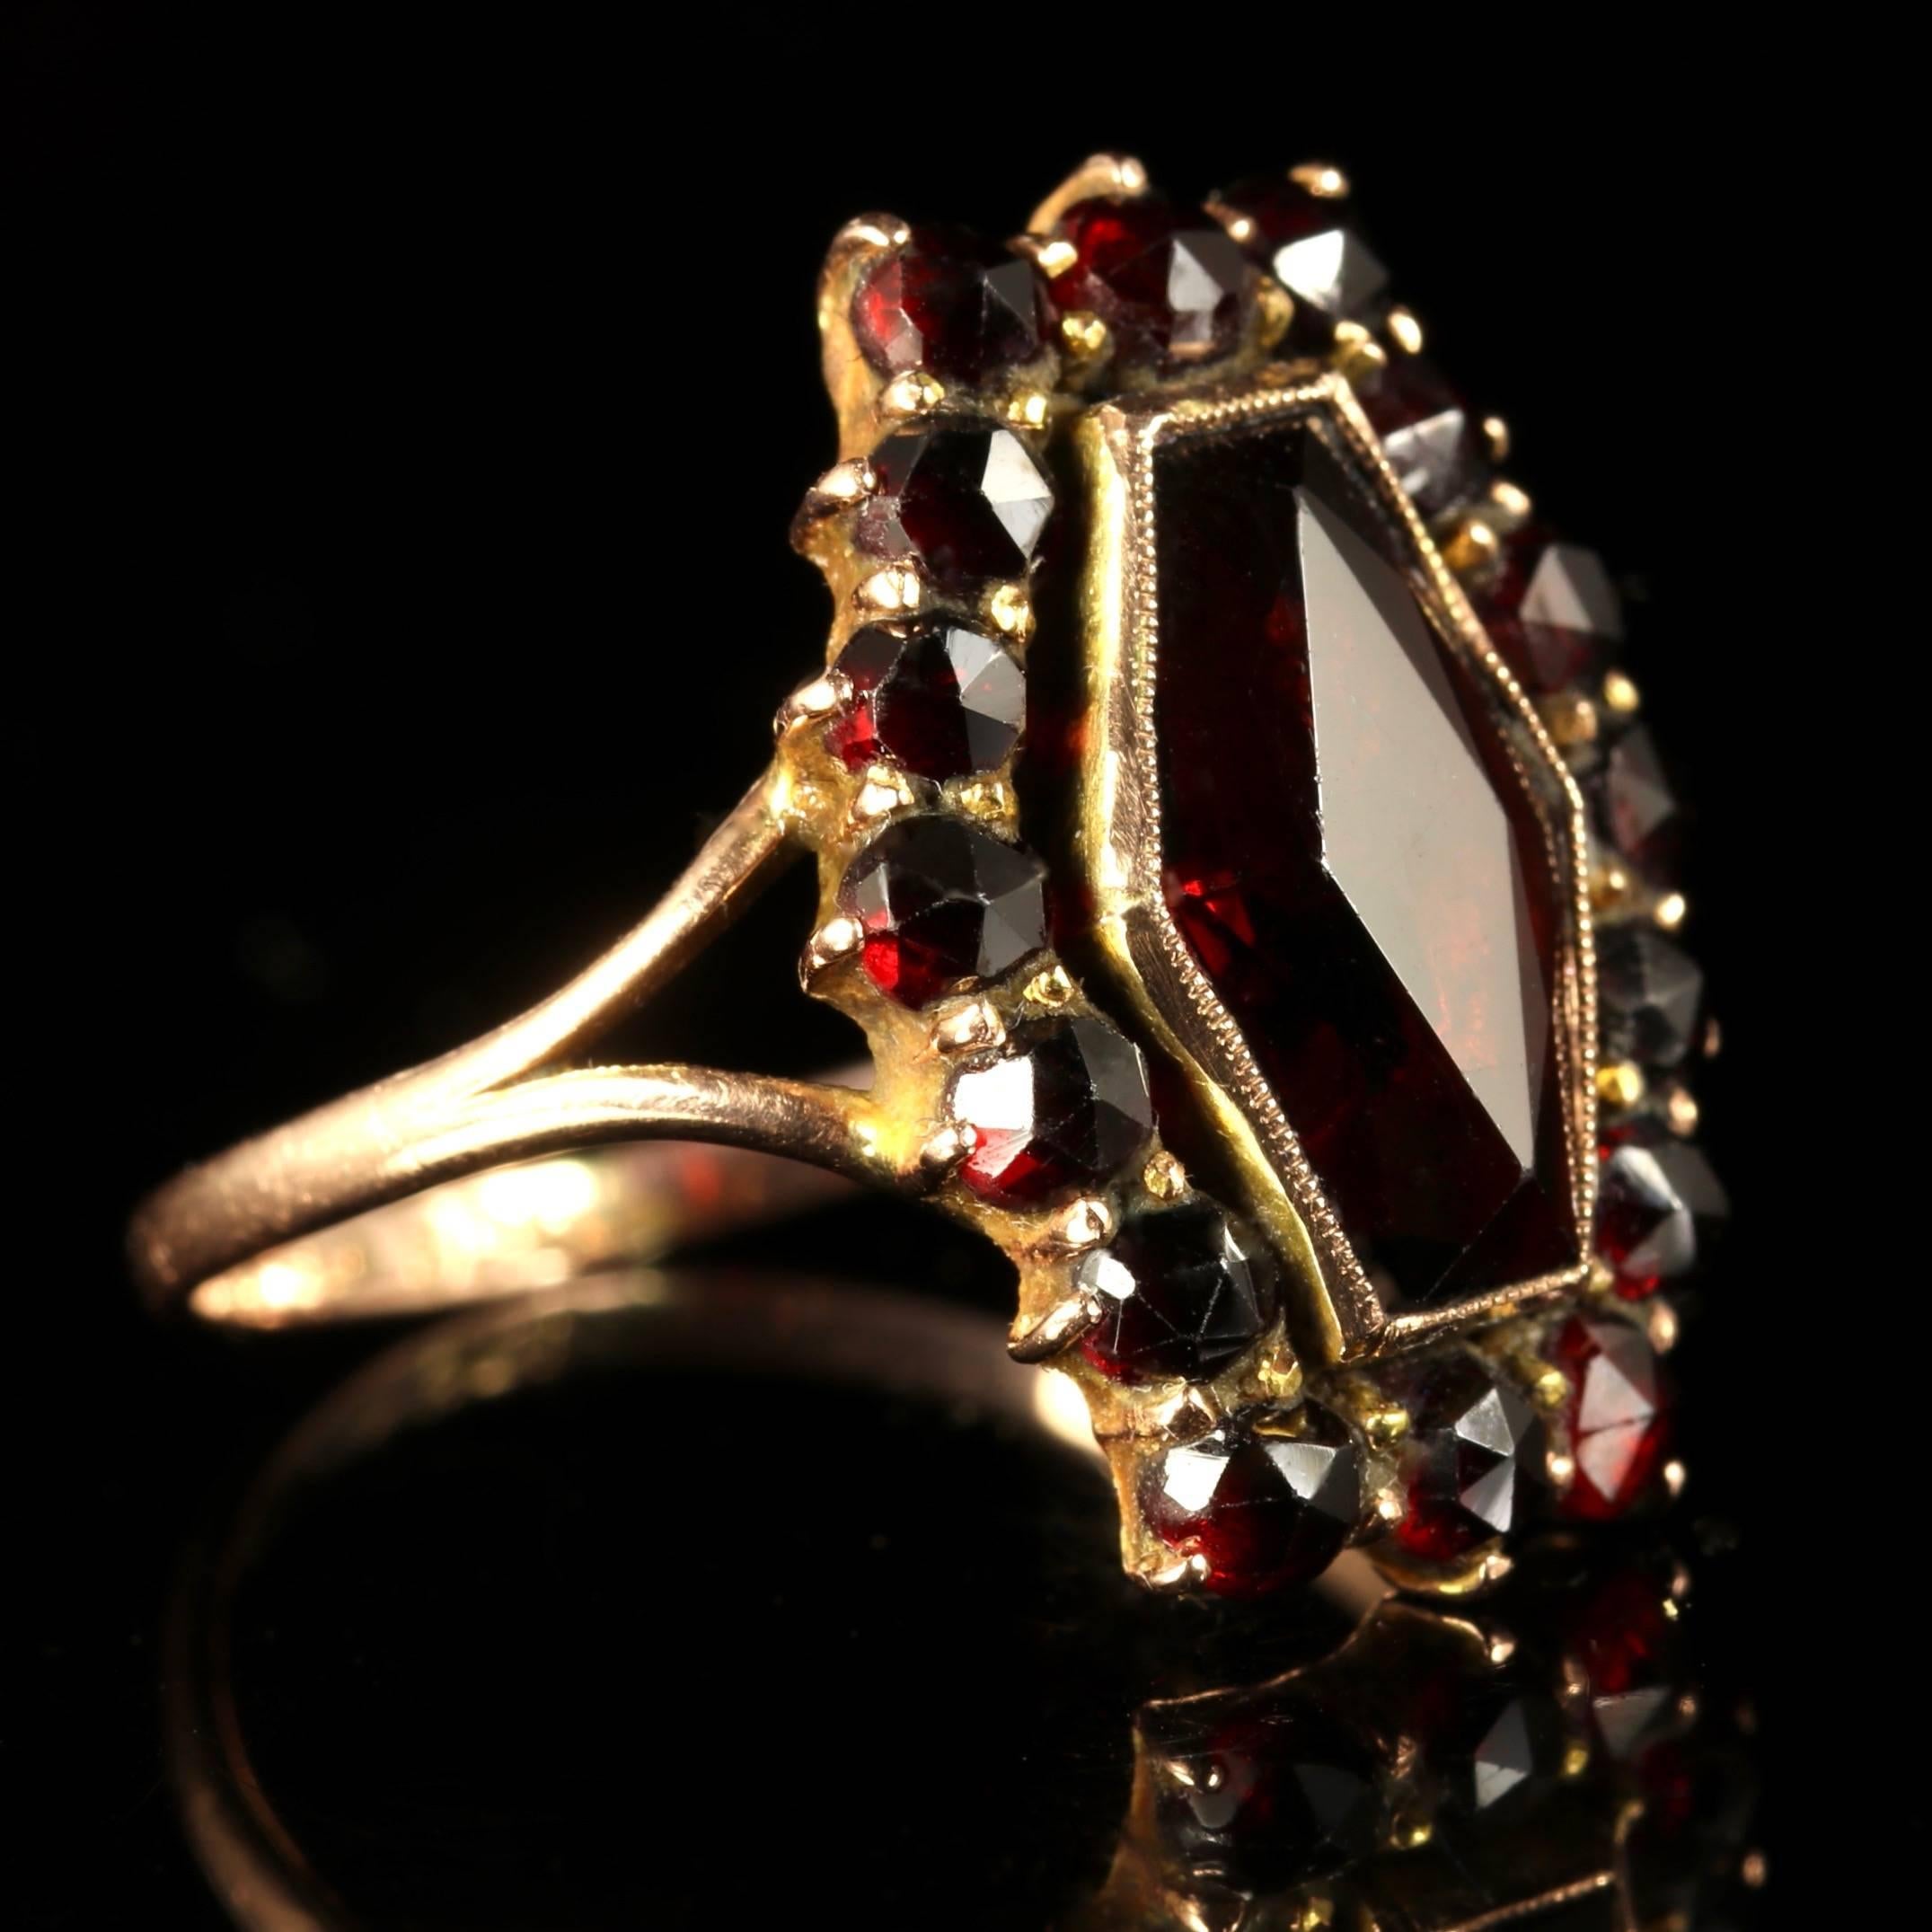 This marvellous Victorian 9ct Gold Bohemian Garnet ring is Circa 1900.

The stunning ring is adorned with a cluster of deep red Bohemian Garnets with a large Garnet in the centre.

Garnet’s are a stone of purity and truth as well as a symbol of love